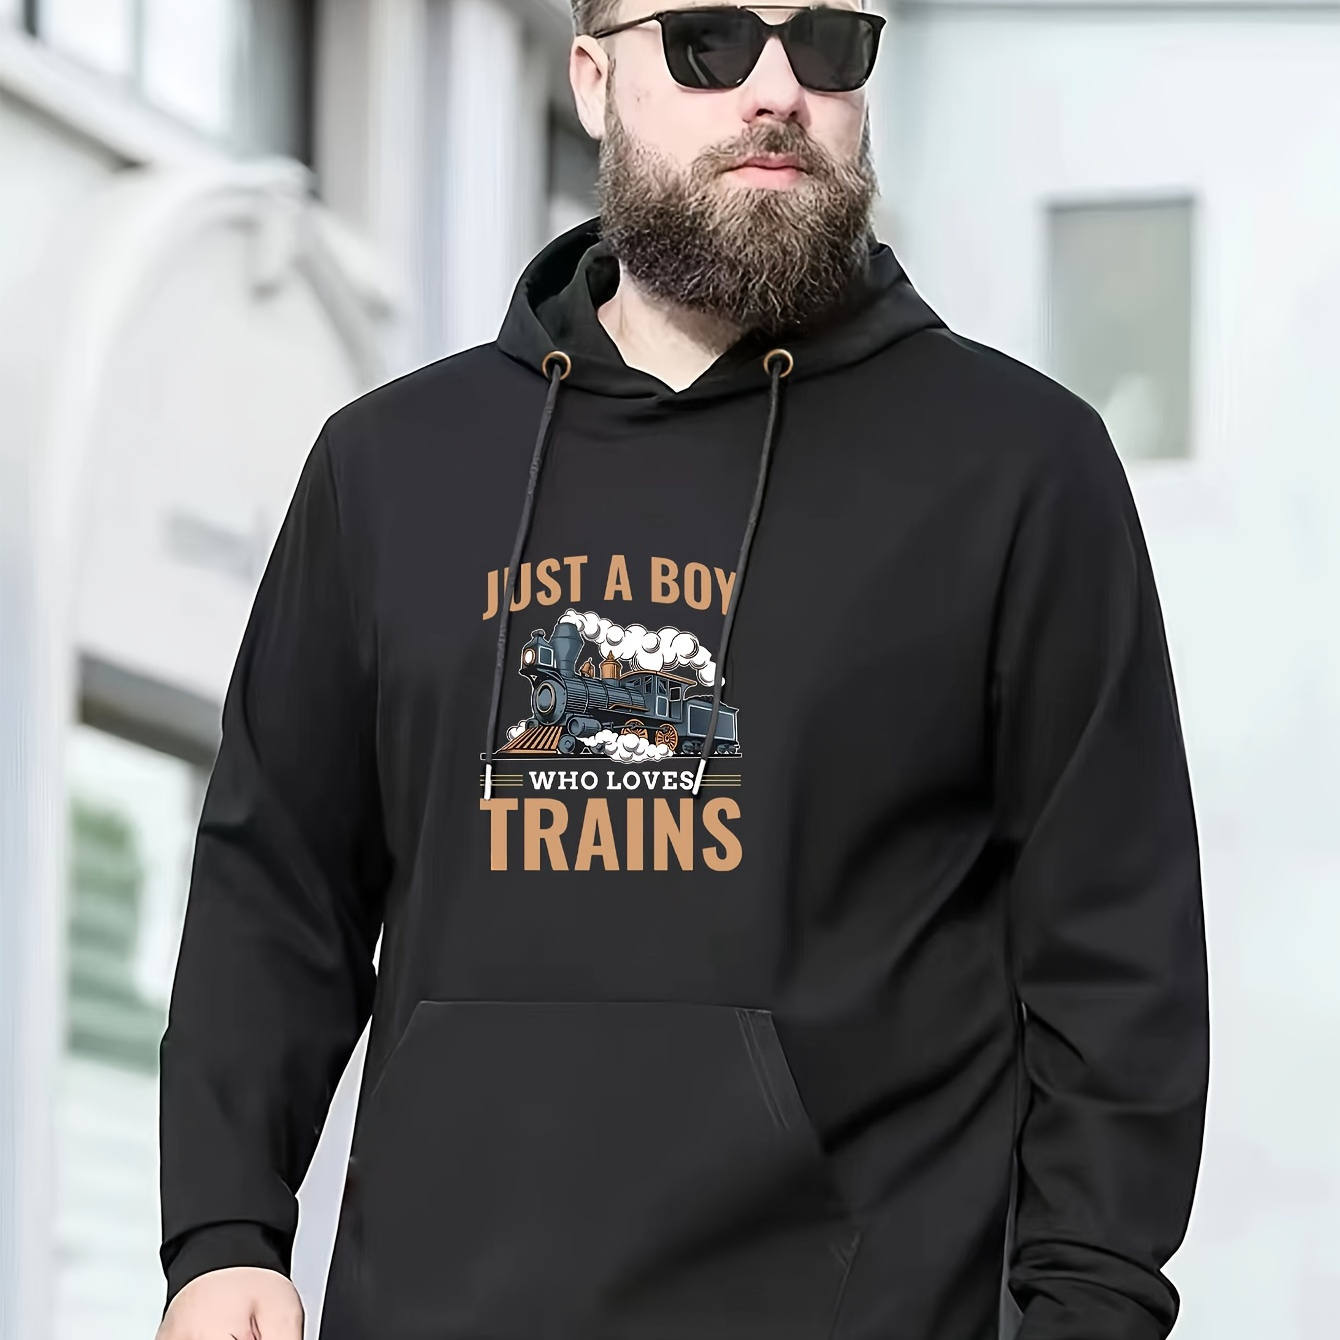 

Plus Size Men's "who Loves Trains" Print Hoodies Oversized Fashion Casual Hooded Sweatshirt Fall Winter, Men's Clothing